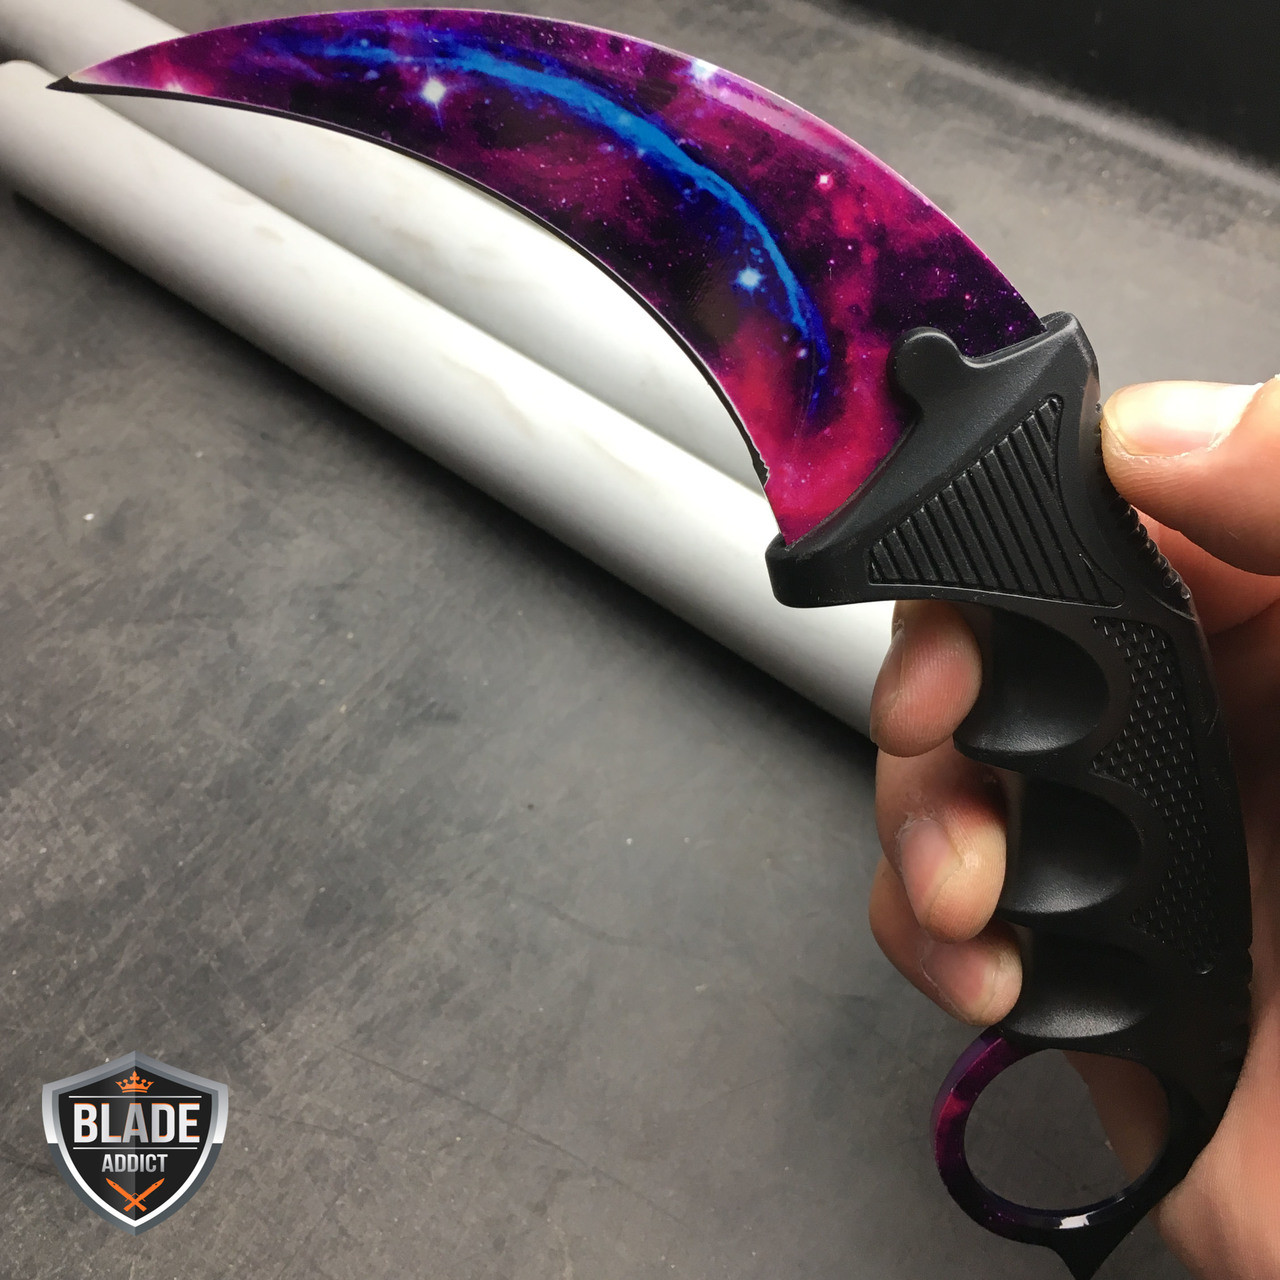 The Galaxy Knife Collection